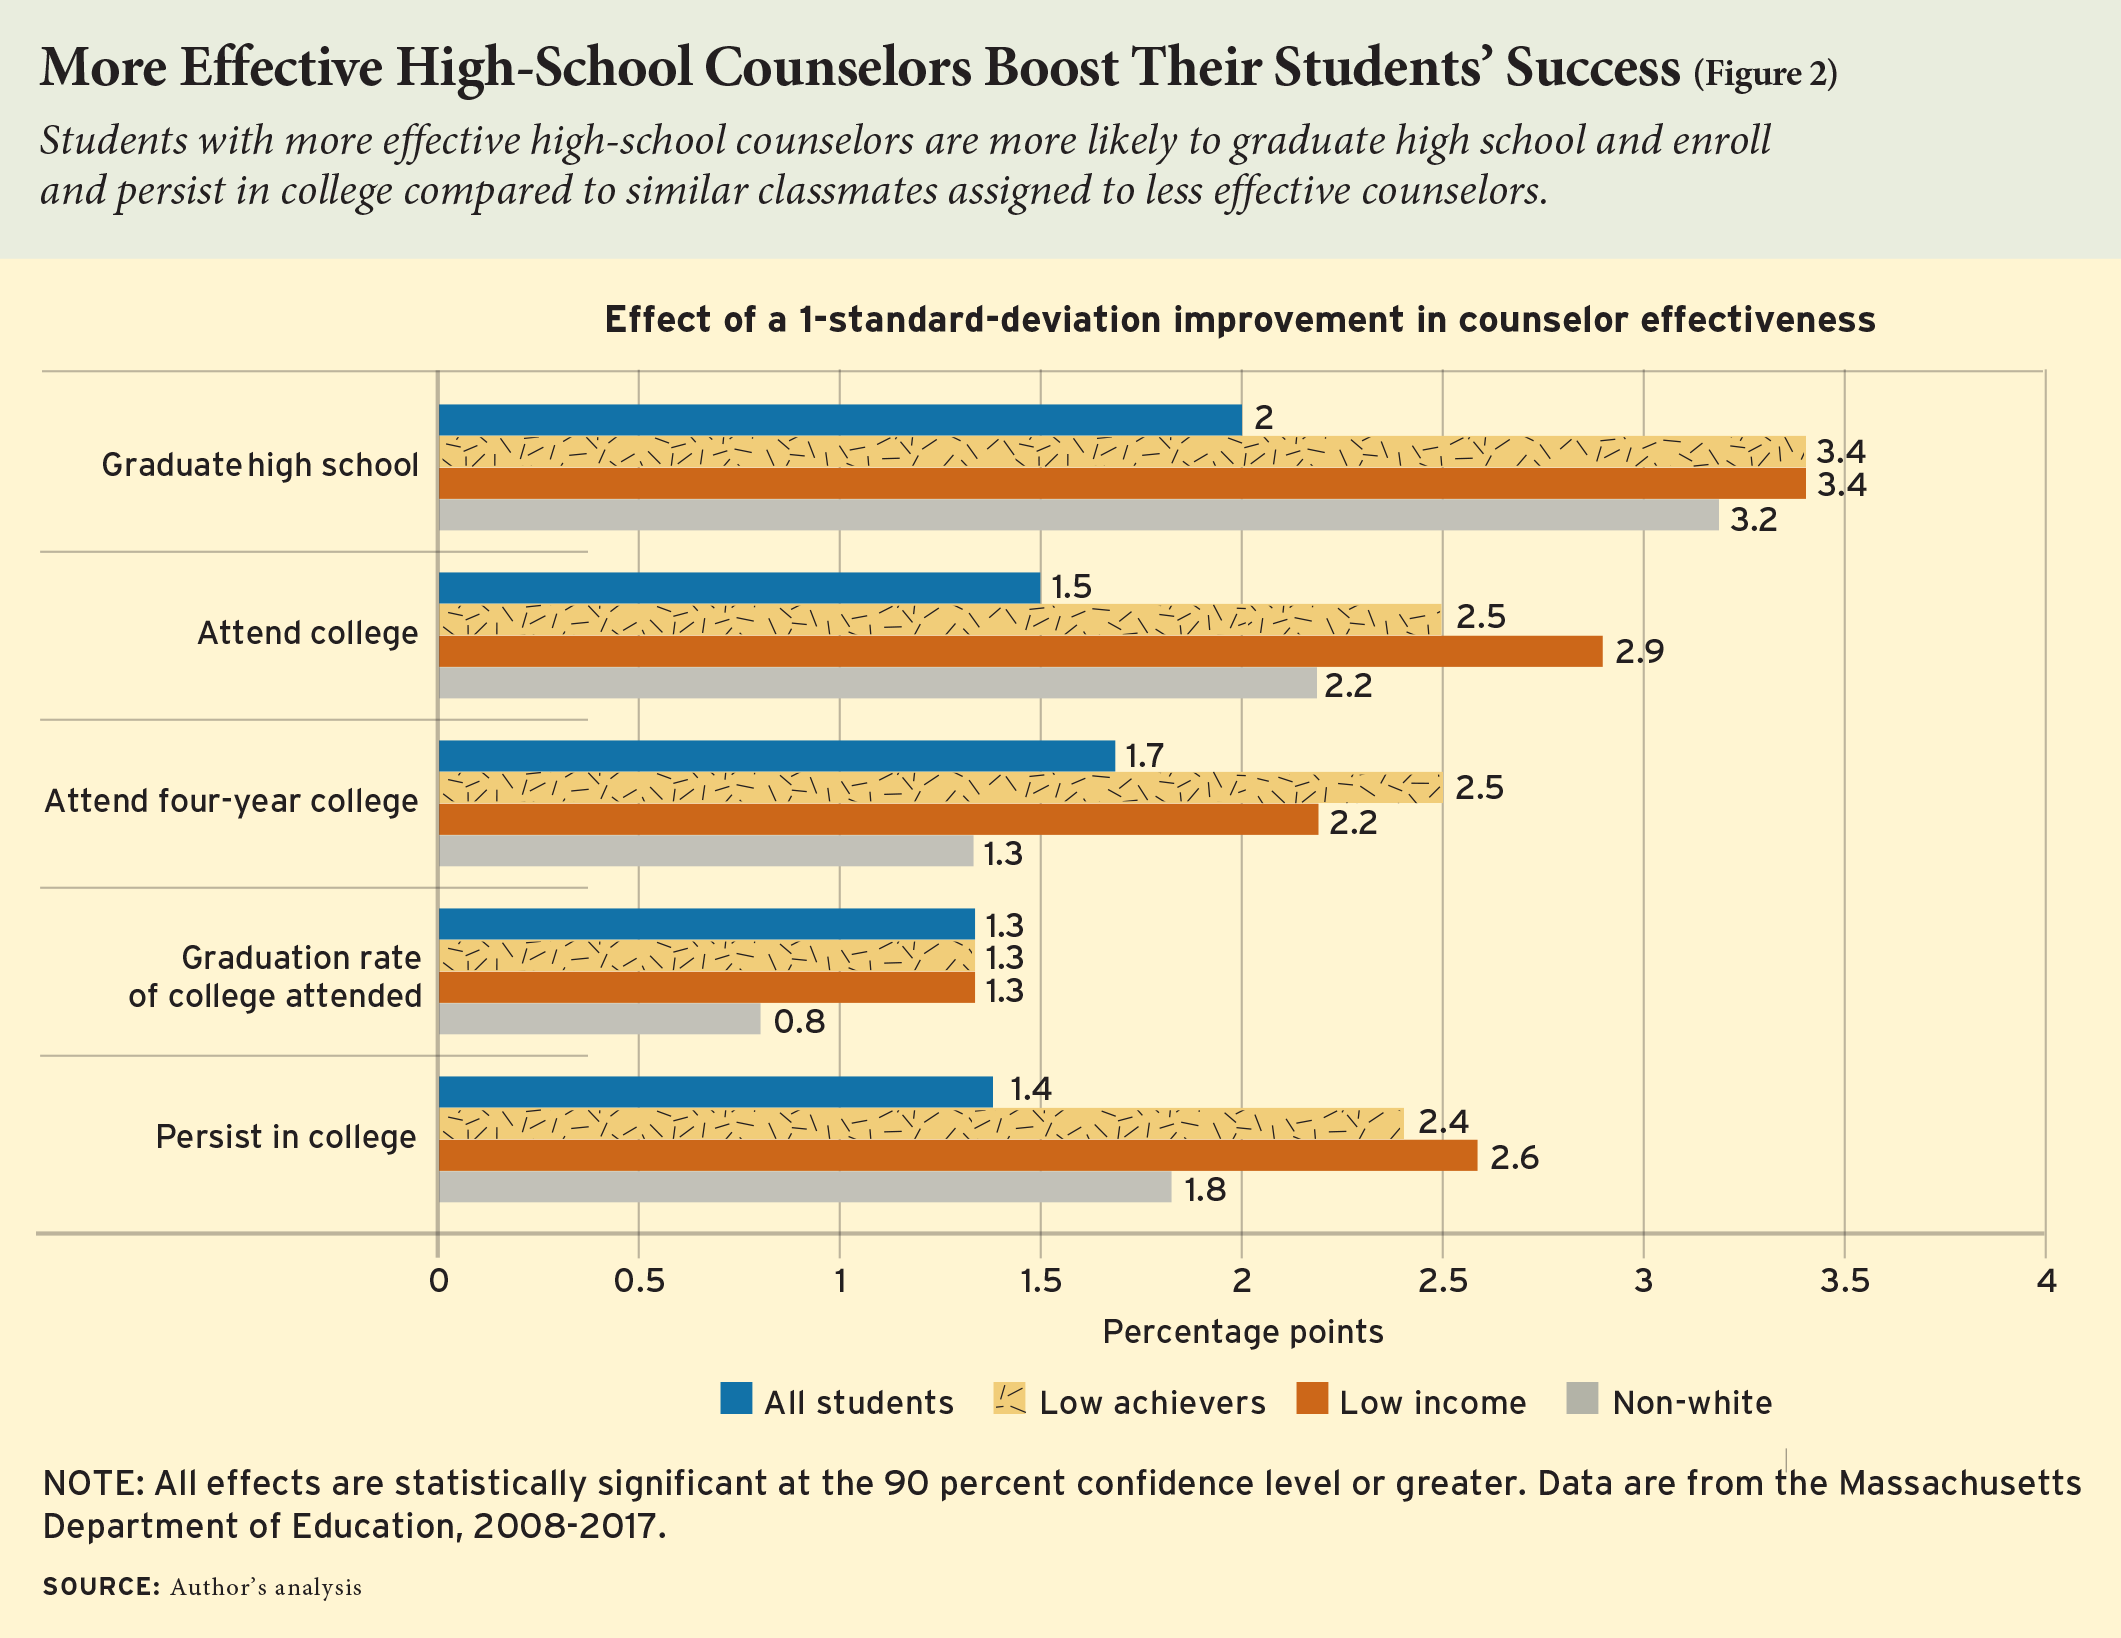 More Effective High-School Counselors Boost Their Students’ Success (Figure 2)